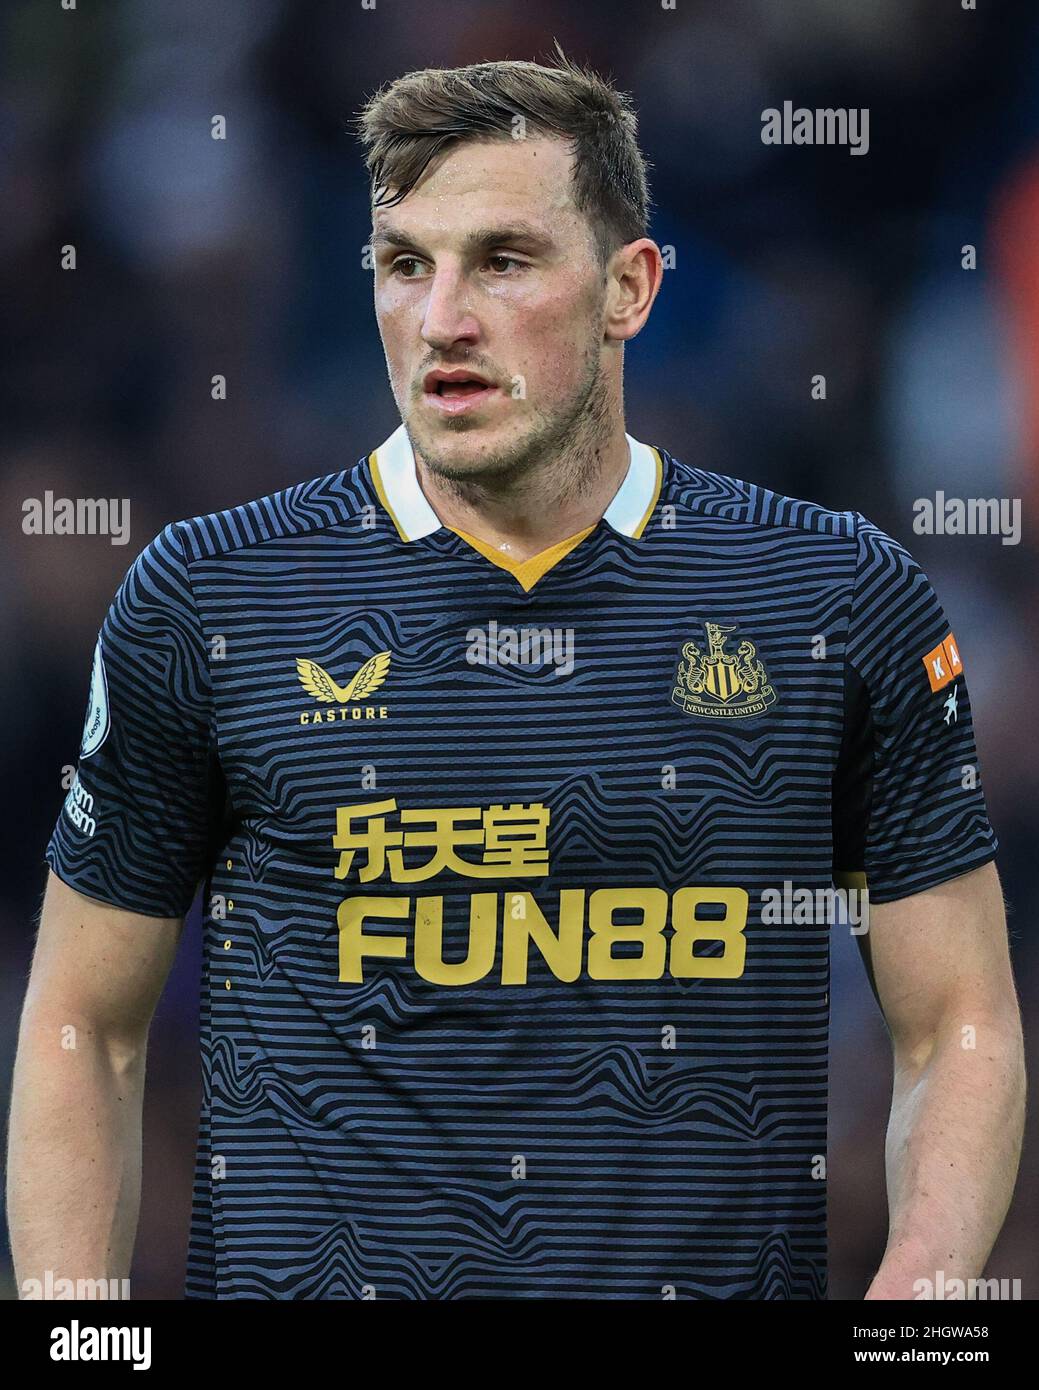 Chris Wood #20 of Newcastle United during the Premier League fixture Leeds United vs Newcastle United at Elland Road, Leeds, UK. 22nd Jan, 2022. Credit: News Images /Alamy Live News Stock Photo